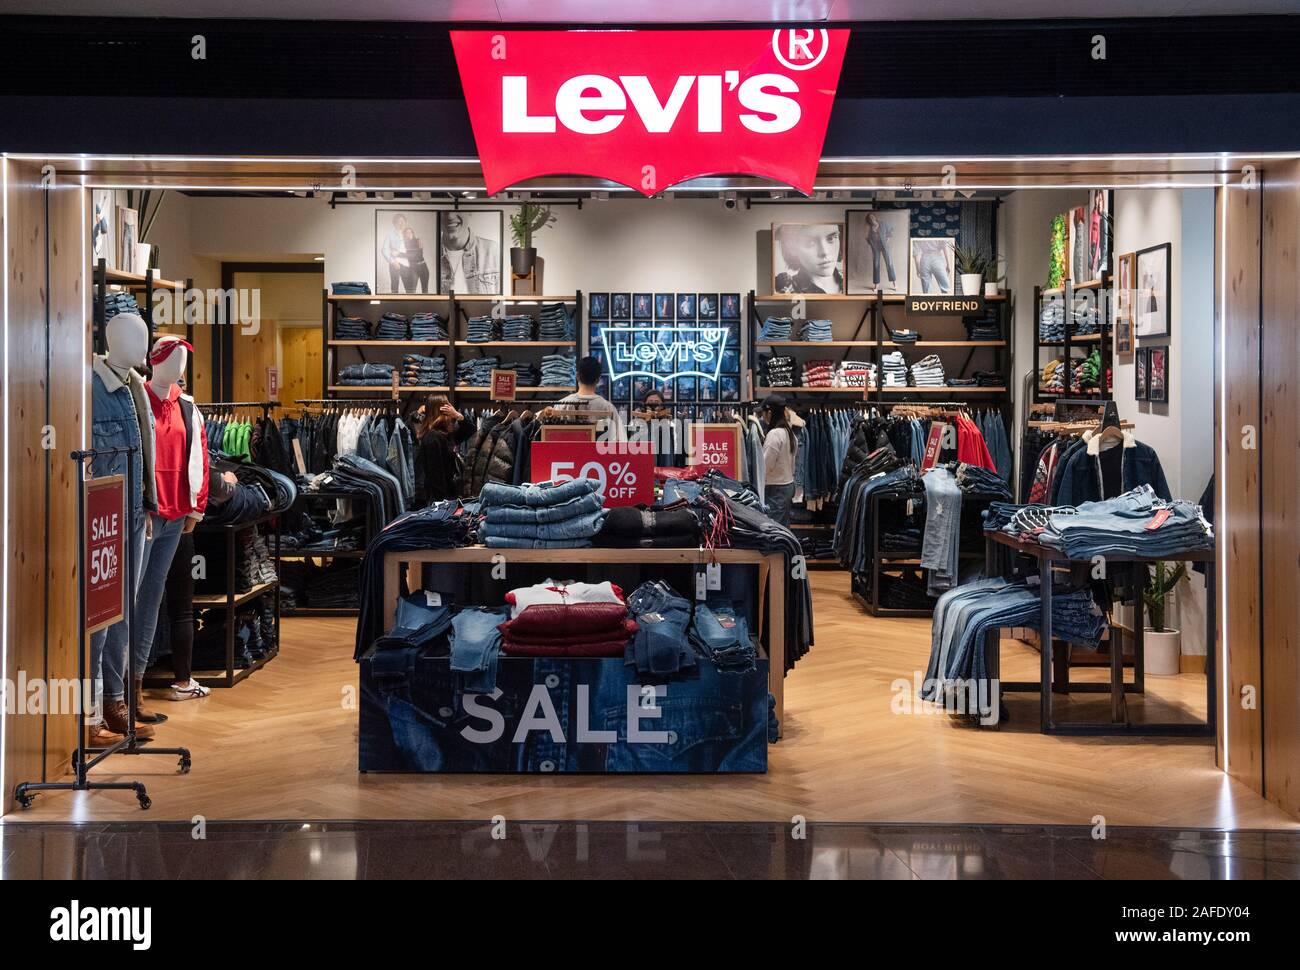 levis in store sale